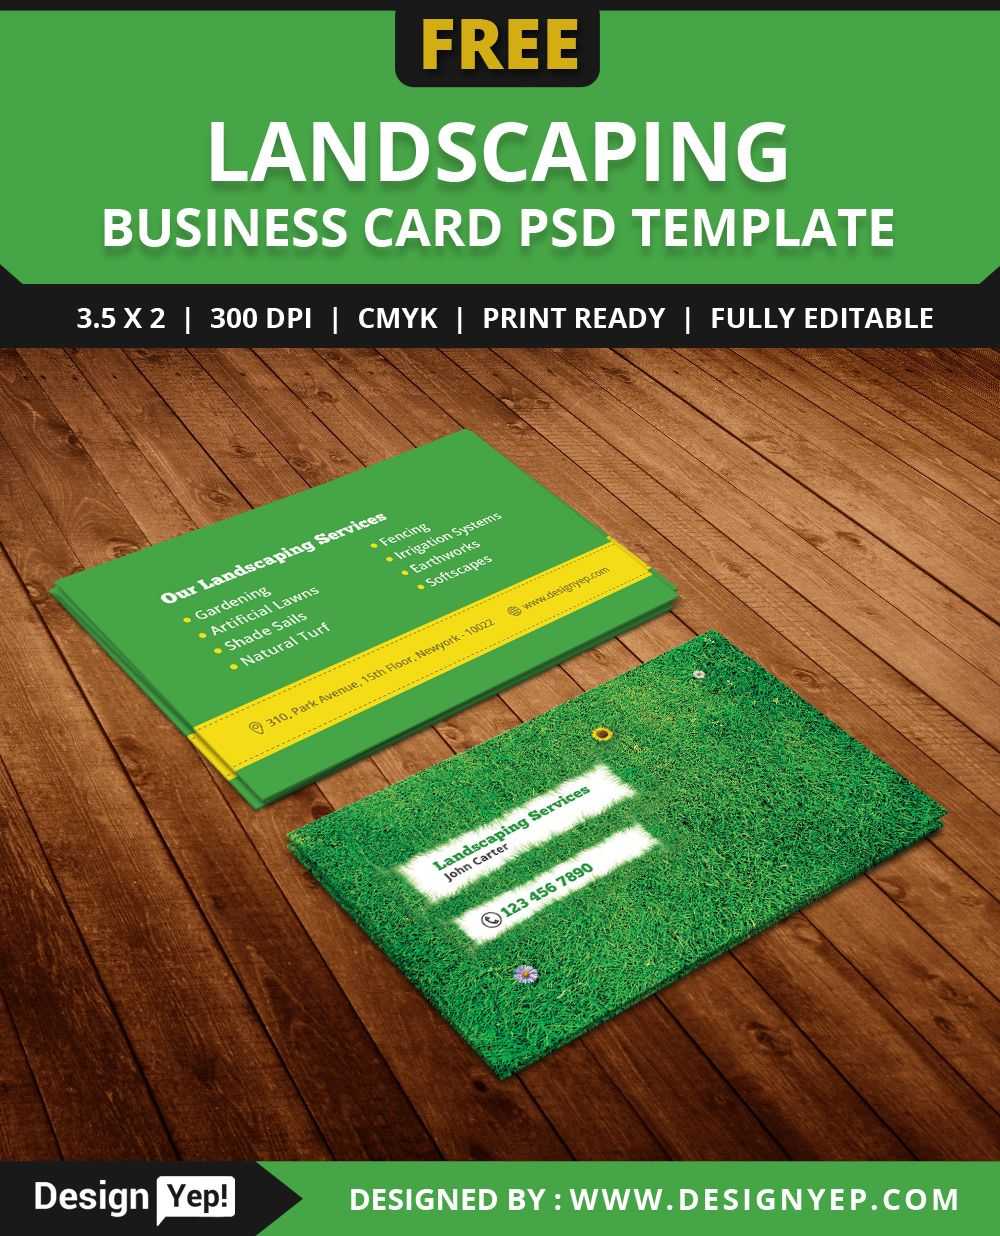 Free Landscaping Business Card Template Psd | Free Business With Gardening Business Cards Templates